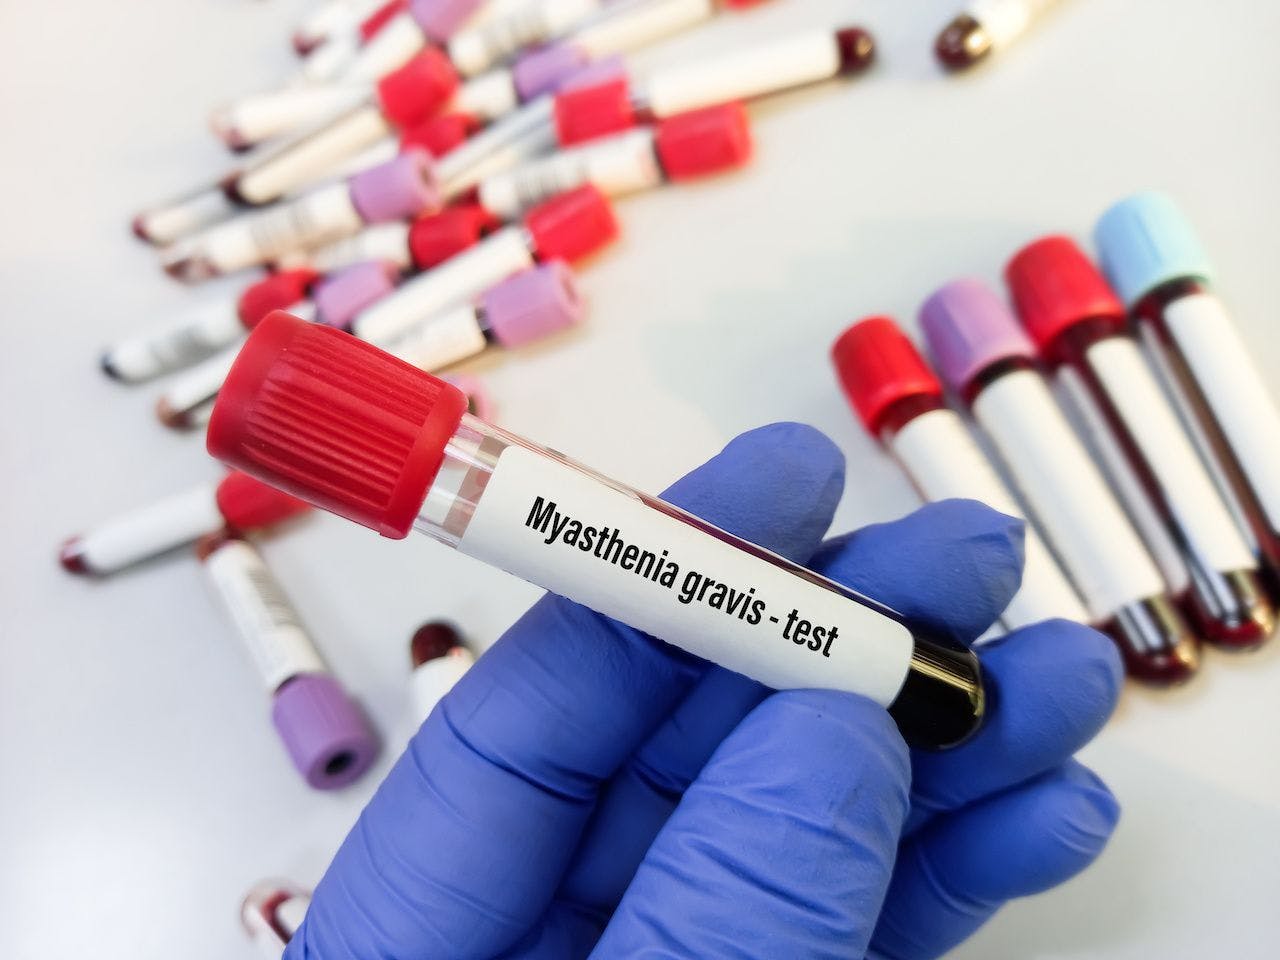 Laboratory test tubes with blood for myasthenia gravis test, diagnosis of myasthenia gravis disease, focus view: © MdBabul - stock.adobe.com